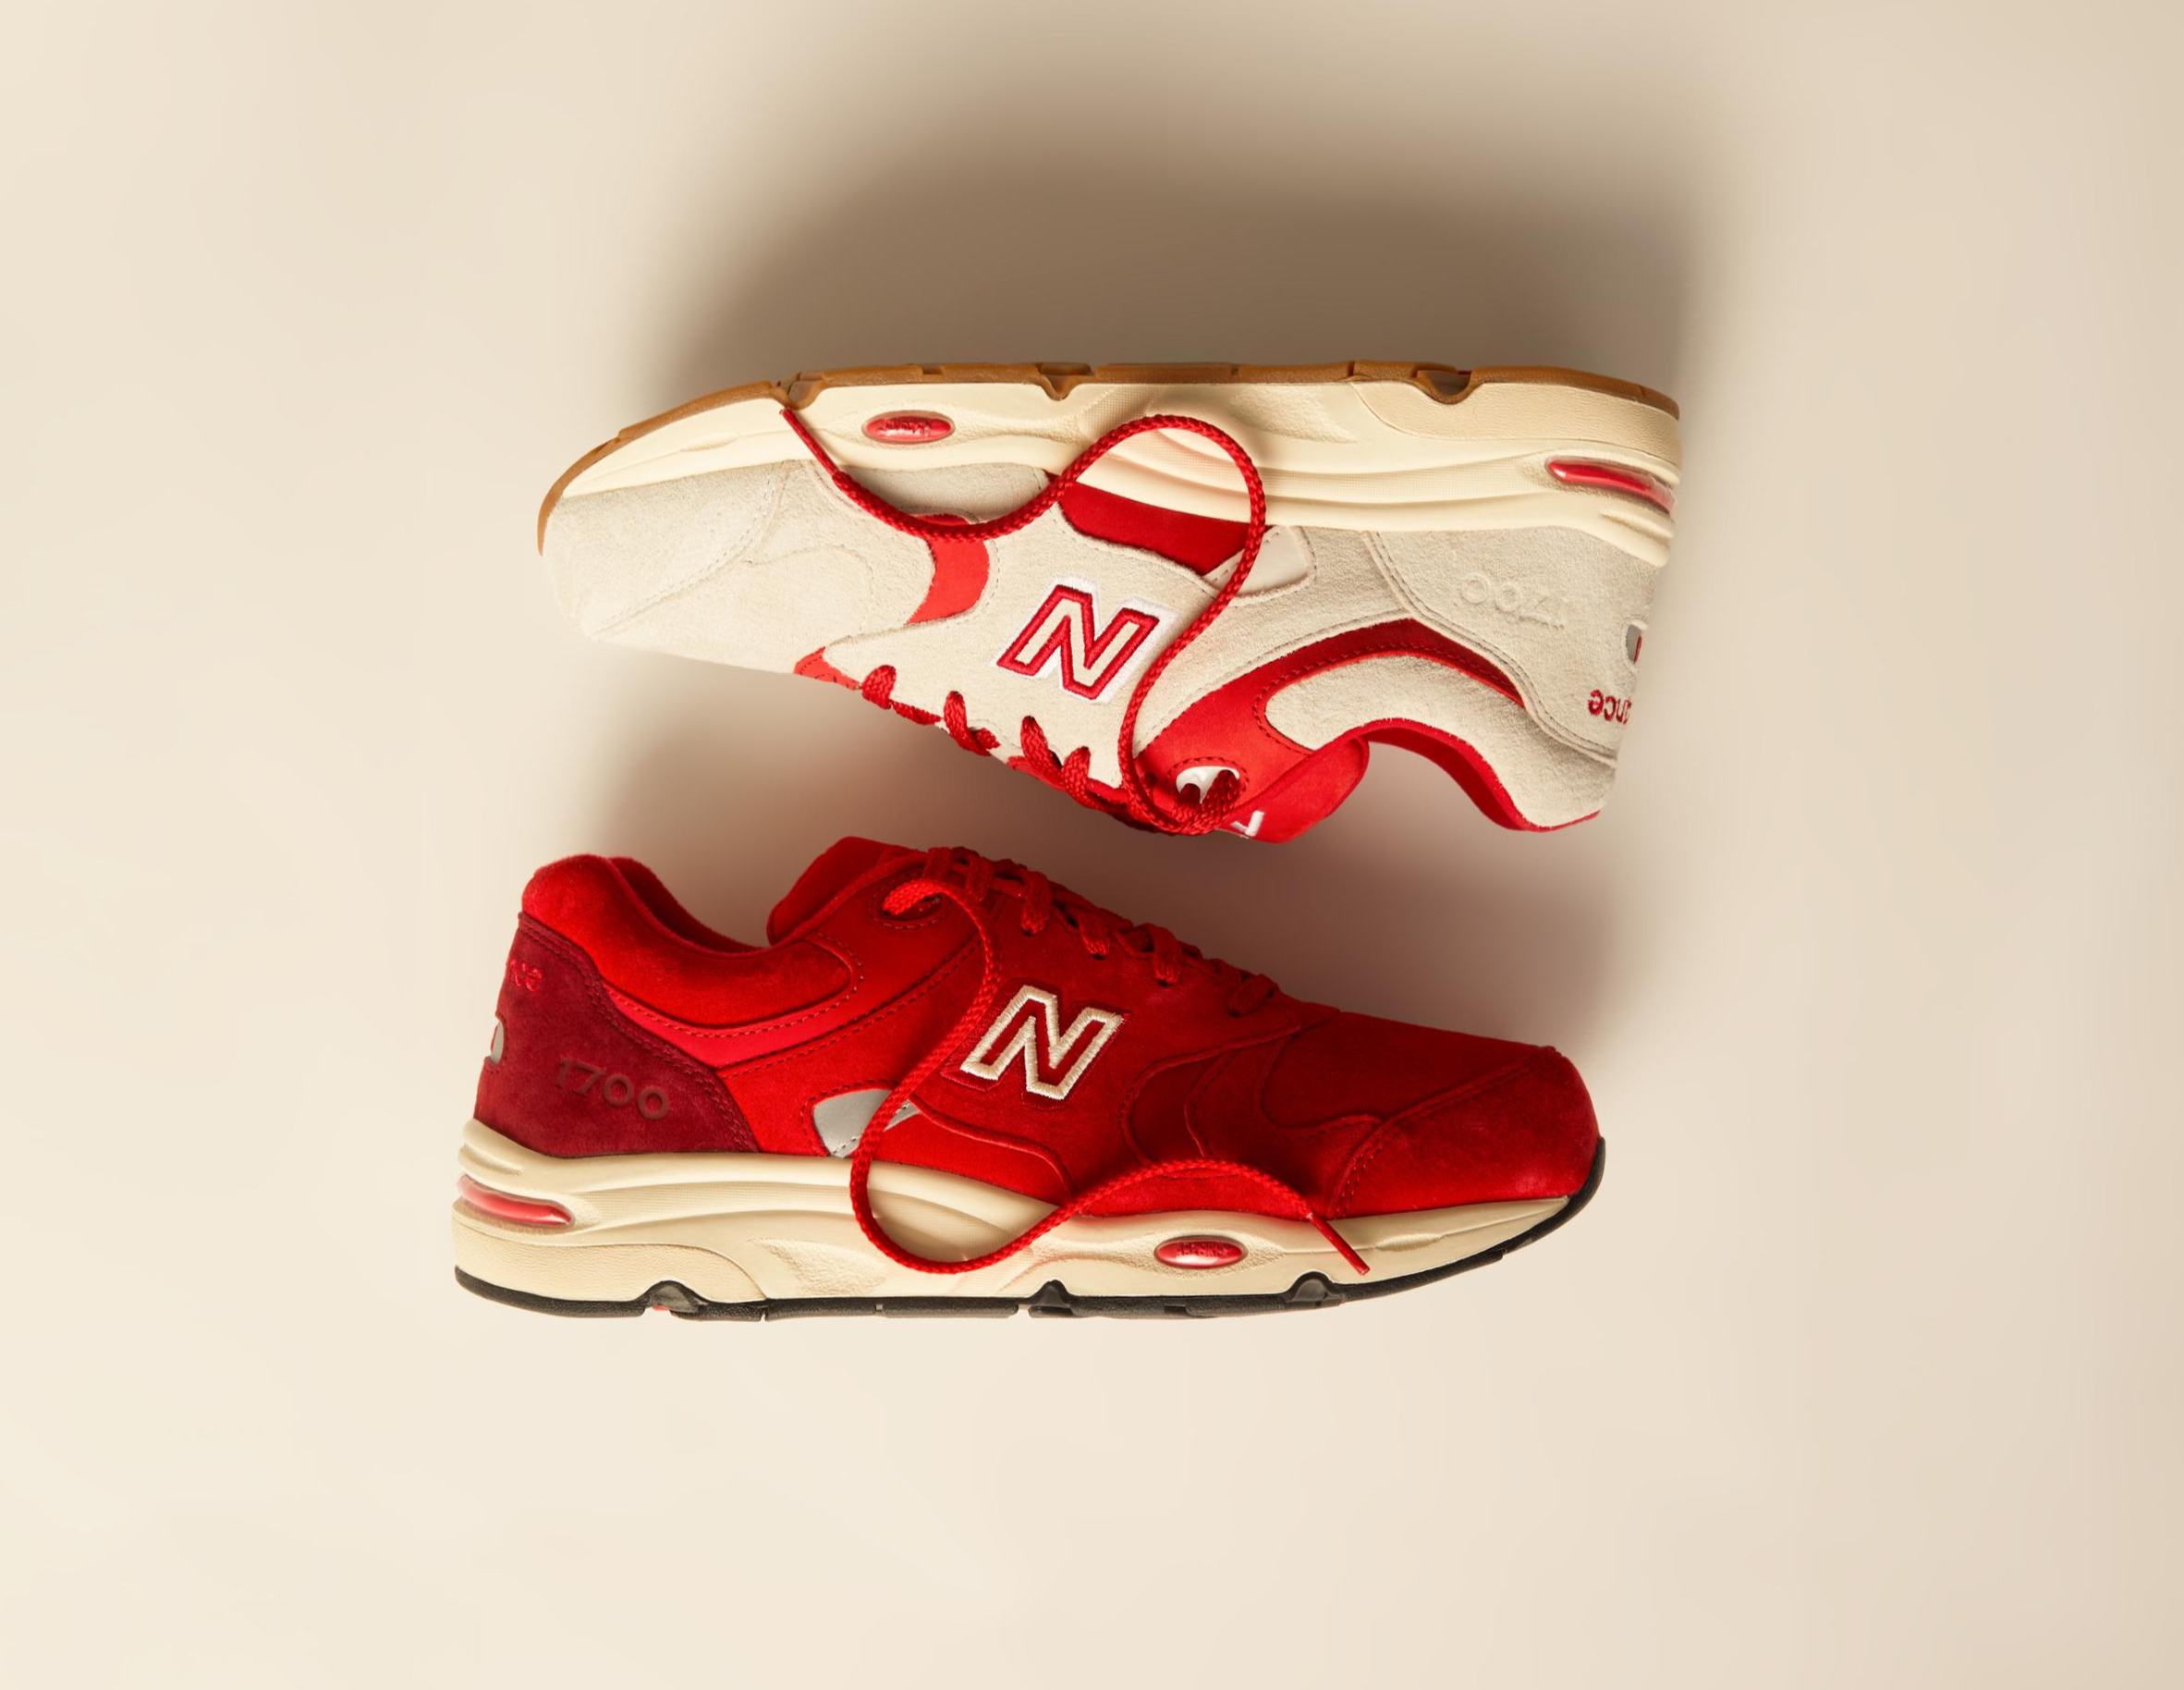 KITH & New Balance's 1700 sneaker collaboration, dropping at the retailer's new Toronto flagship